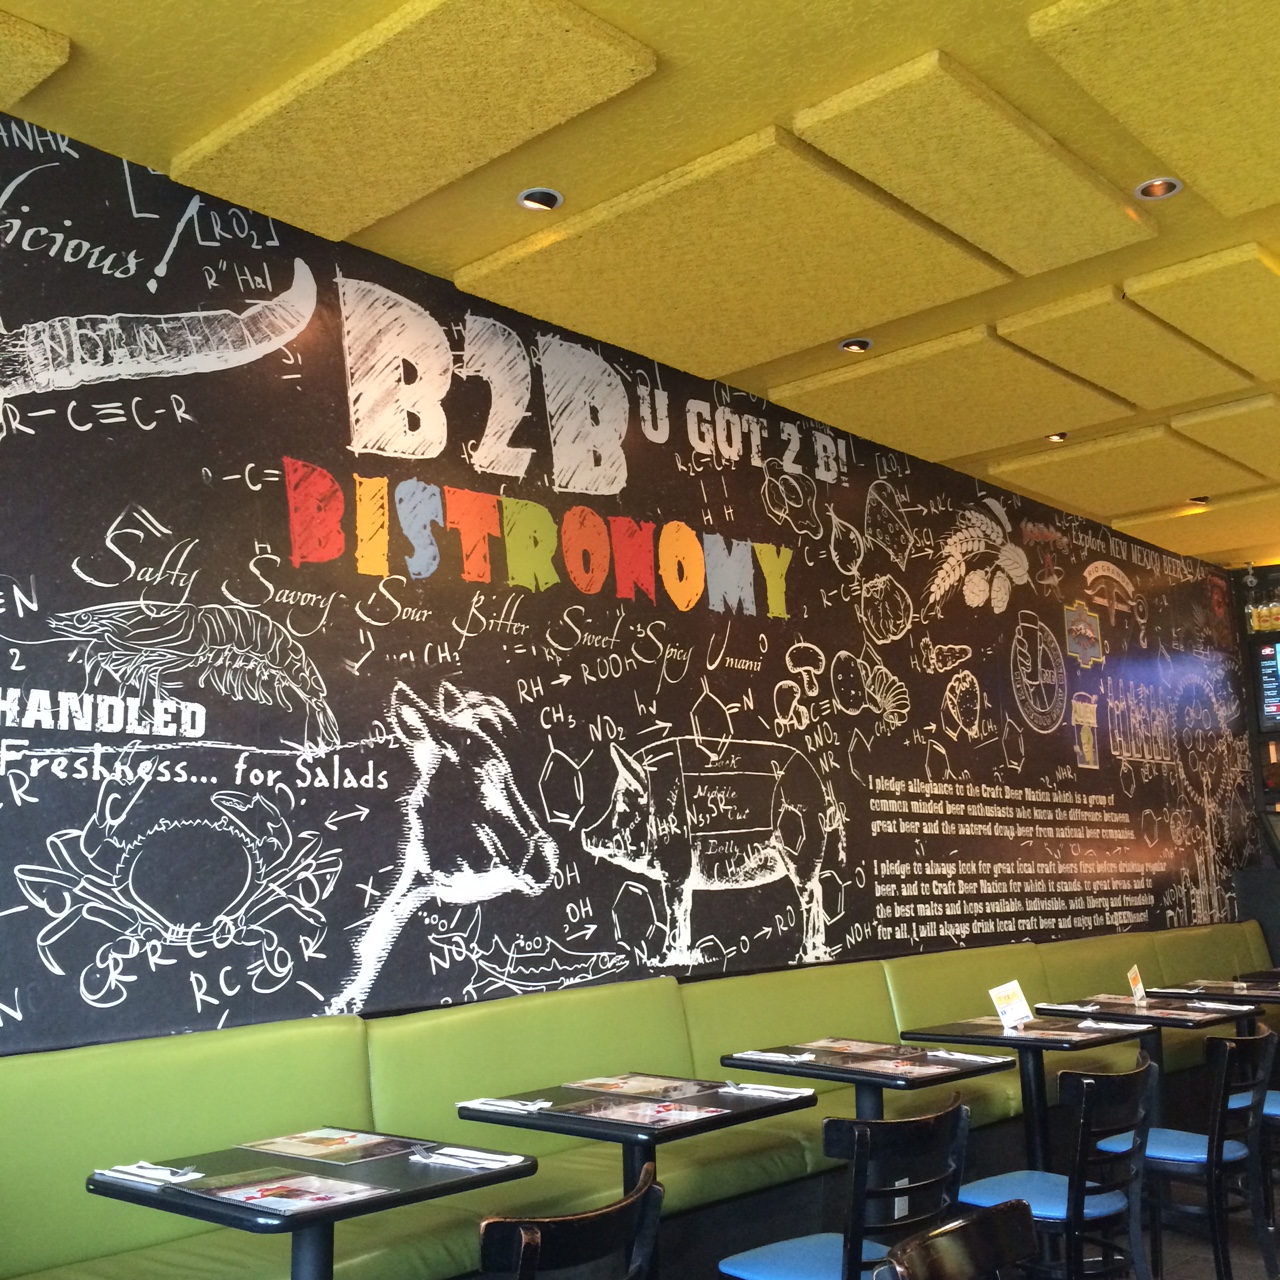 Lunching at Bistronomy B2B in Nob Hill | 50 Hours in a car1280 x 1280